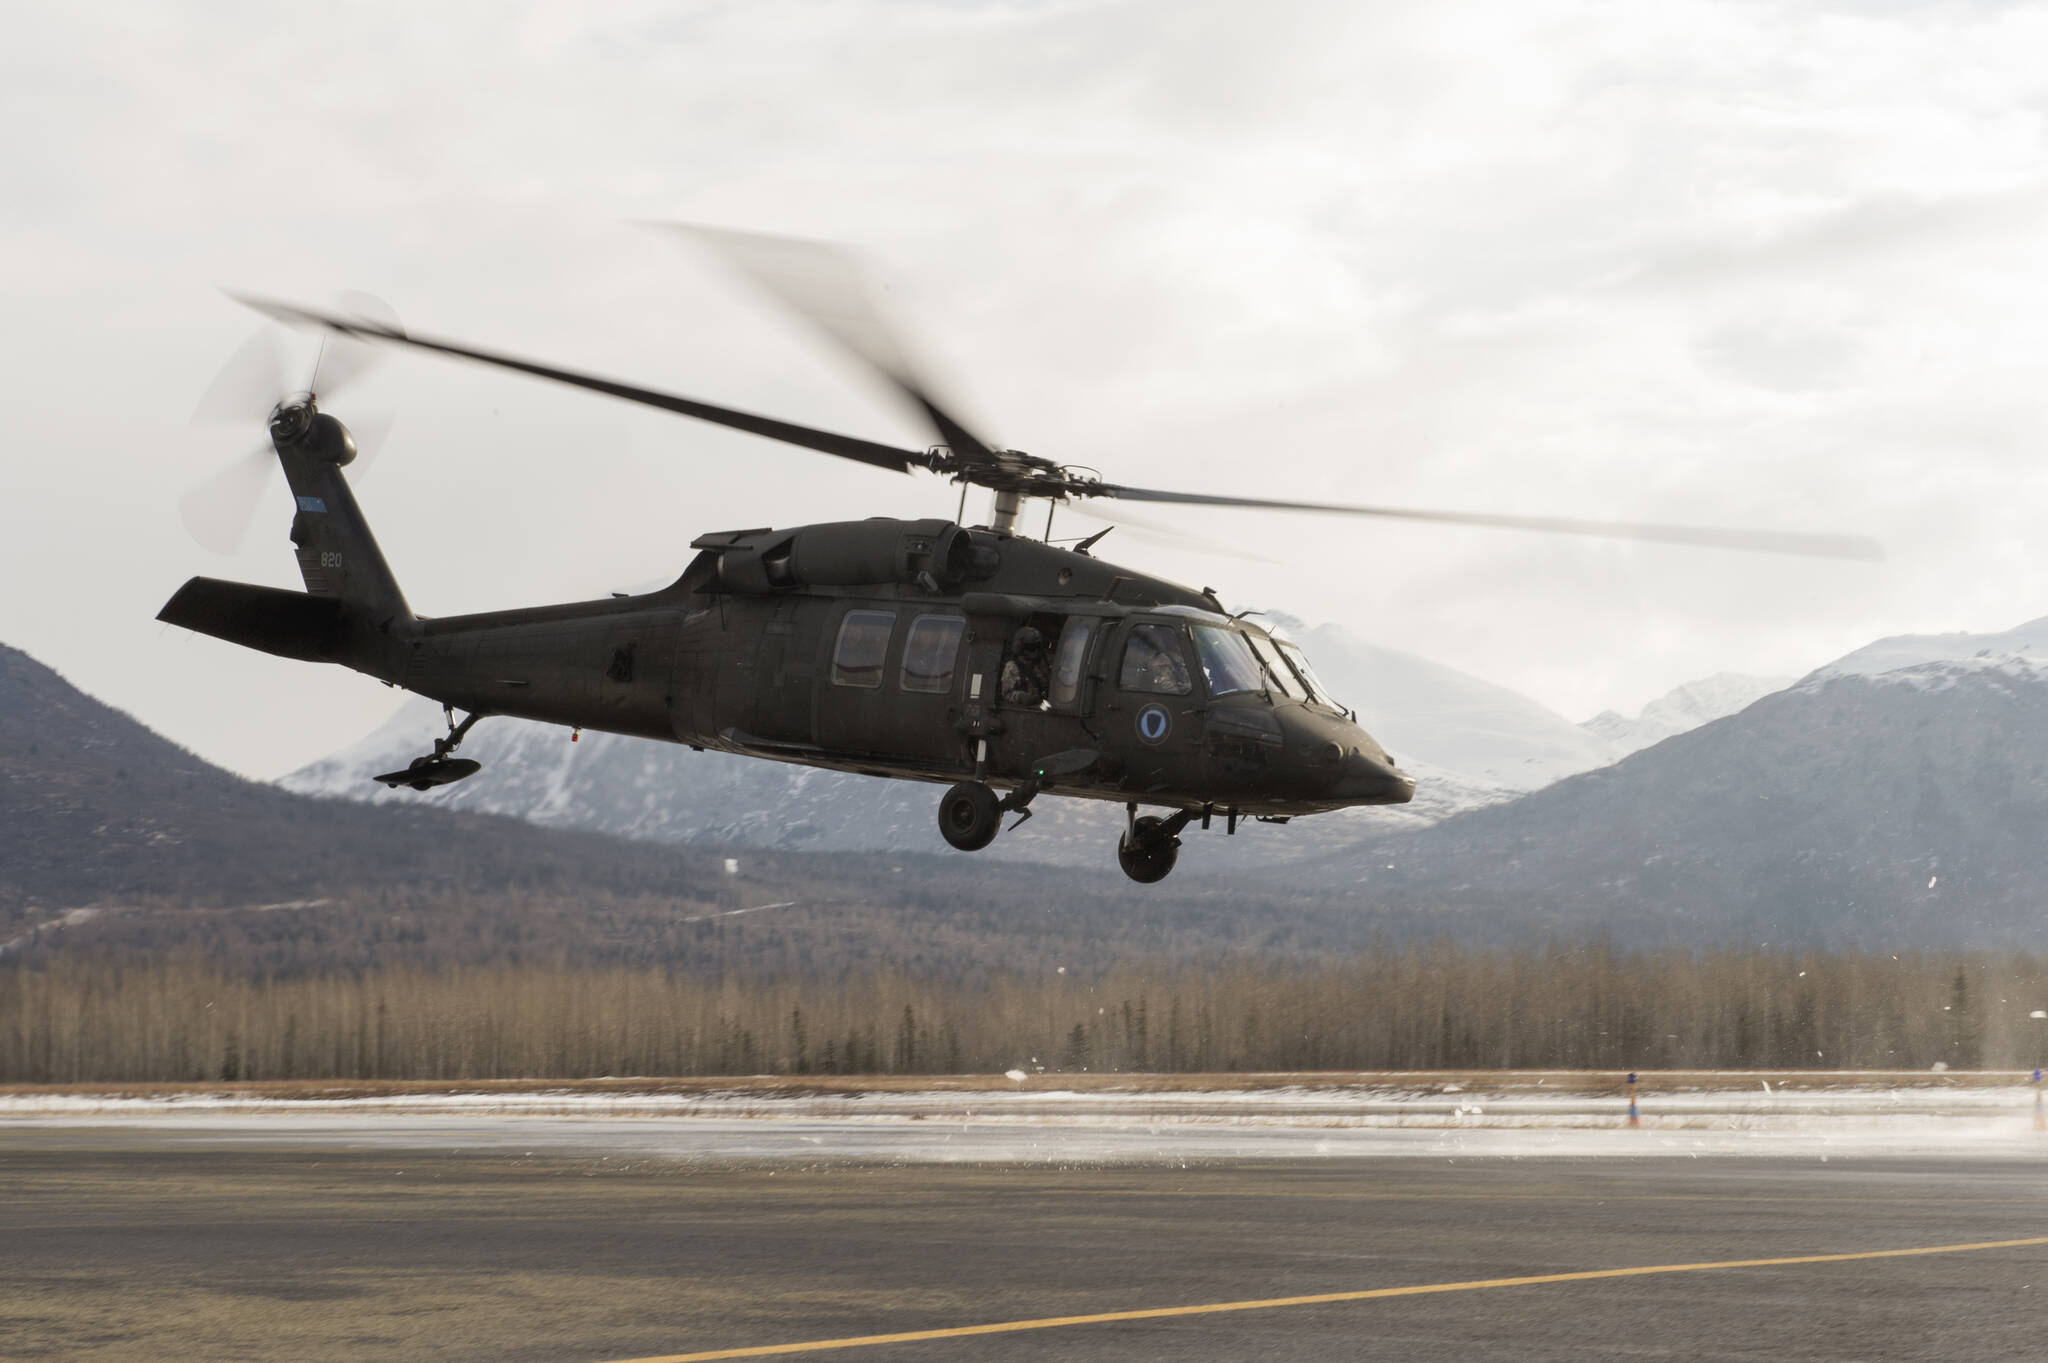 An Alaska Army National Guard aircrew flying a UH-60 Black Hawk aided in the rescue of a mountain biker with a possible spinal injury from the wilderness east of Kenai on May 30, 2022. (Alejandro Pena / U.S. Air Force)